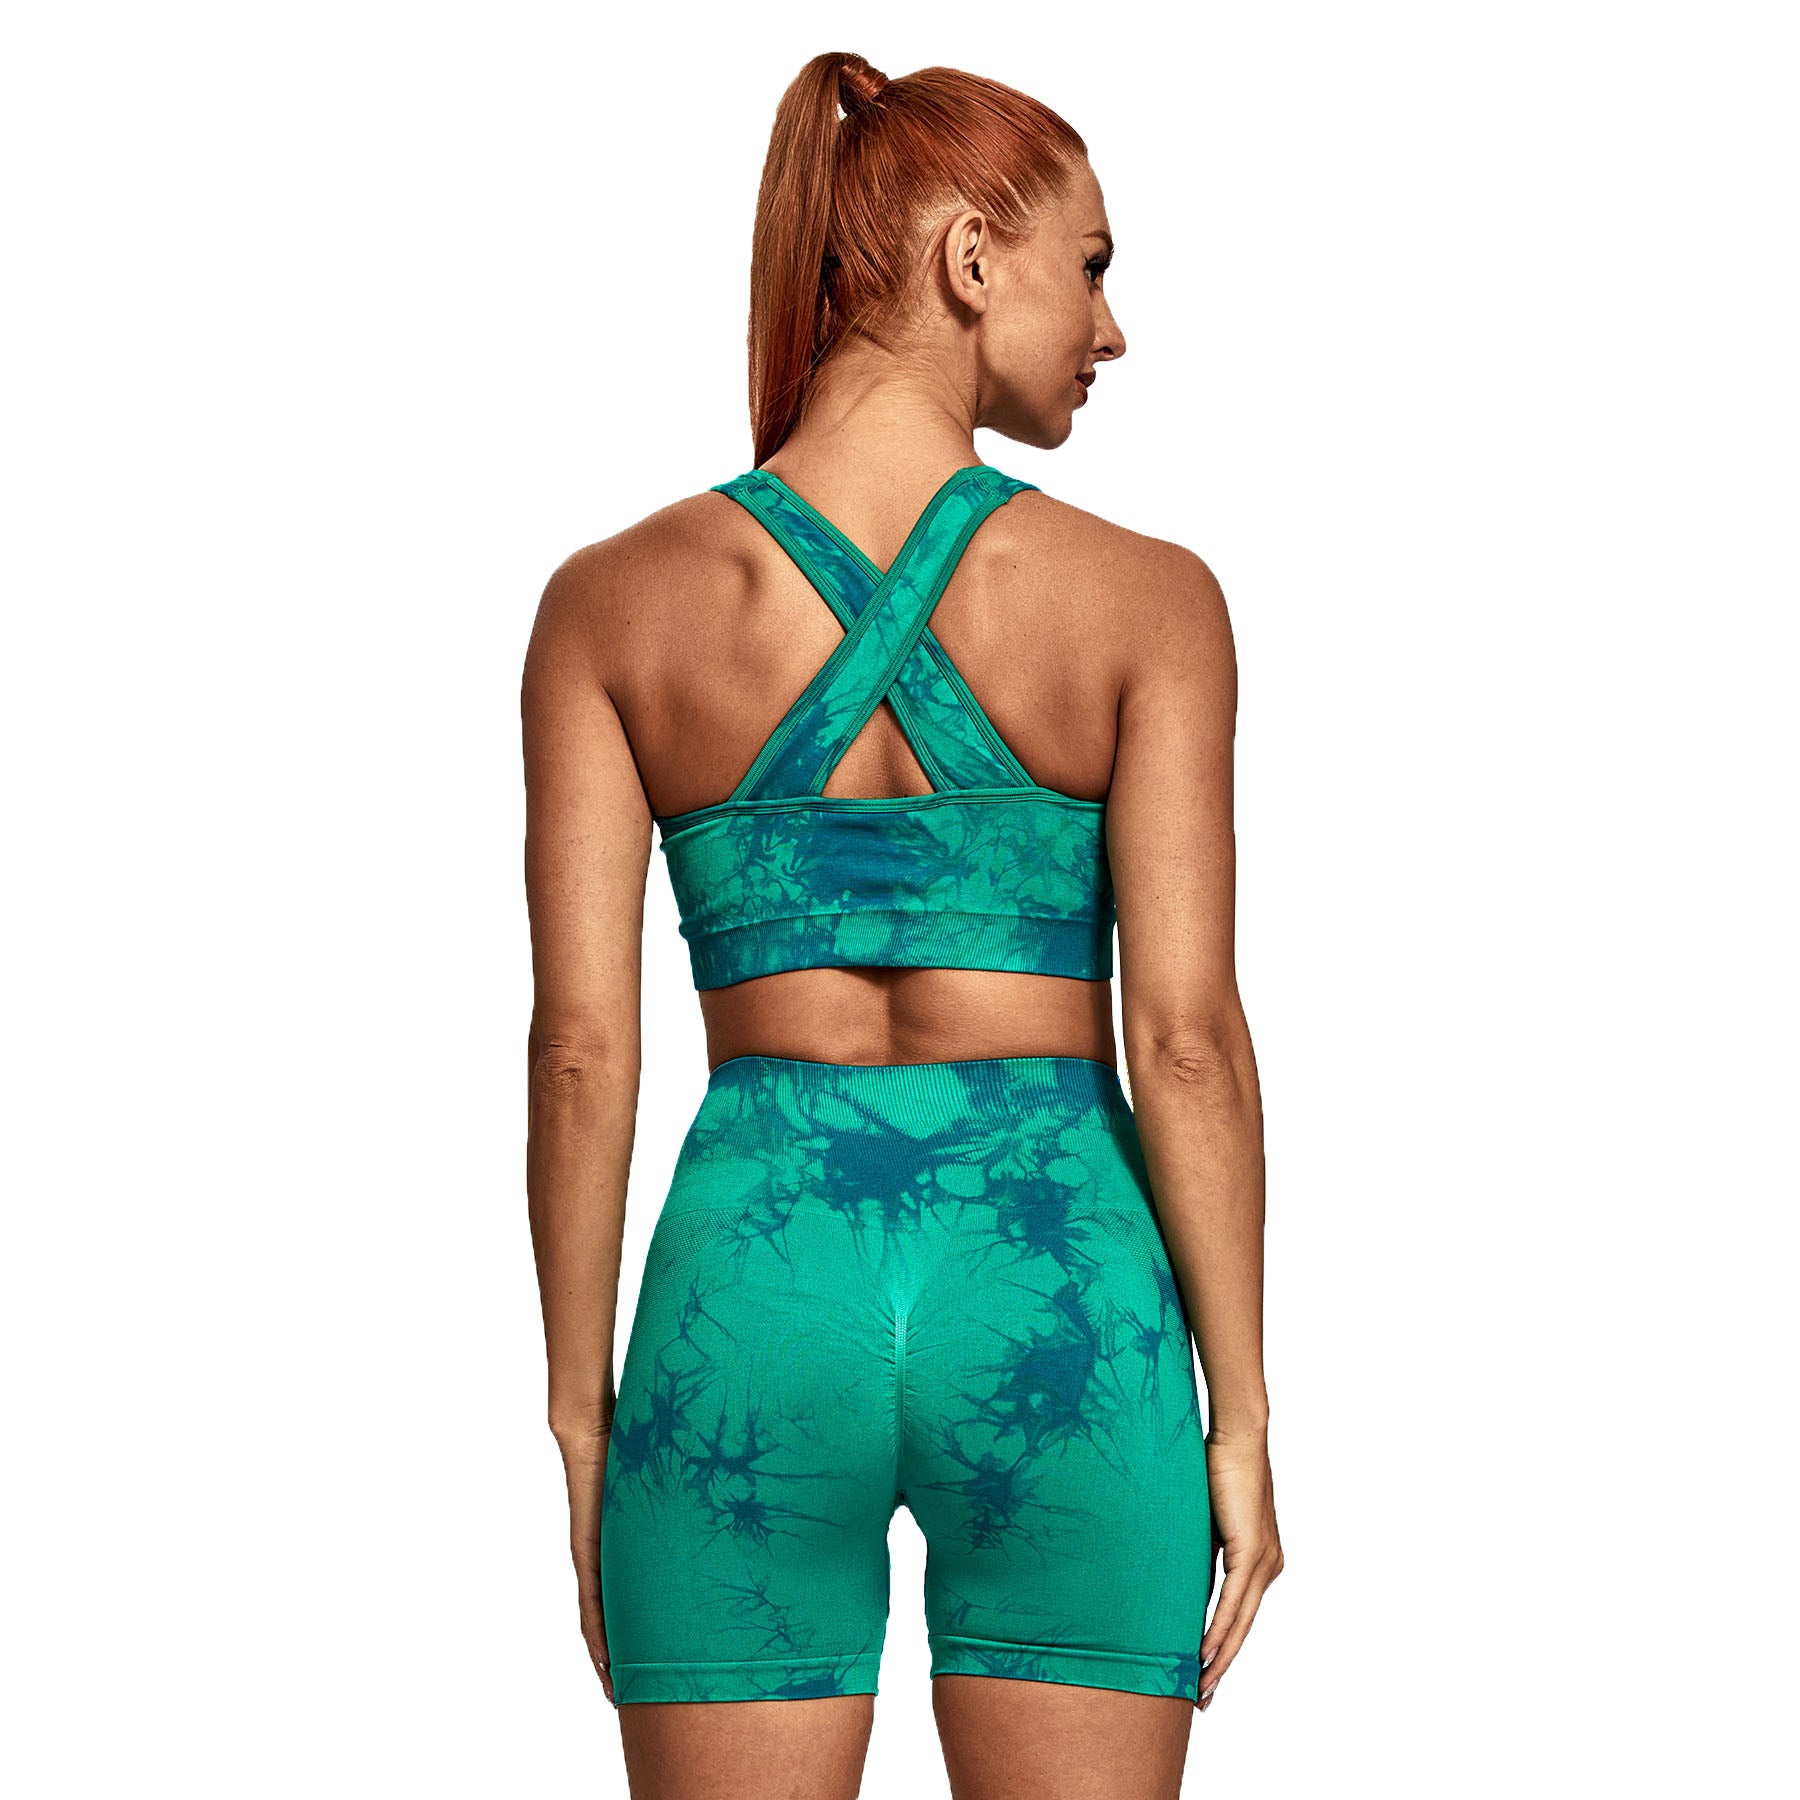 Aoxjox Assets sets (short with bras)